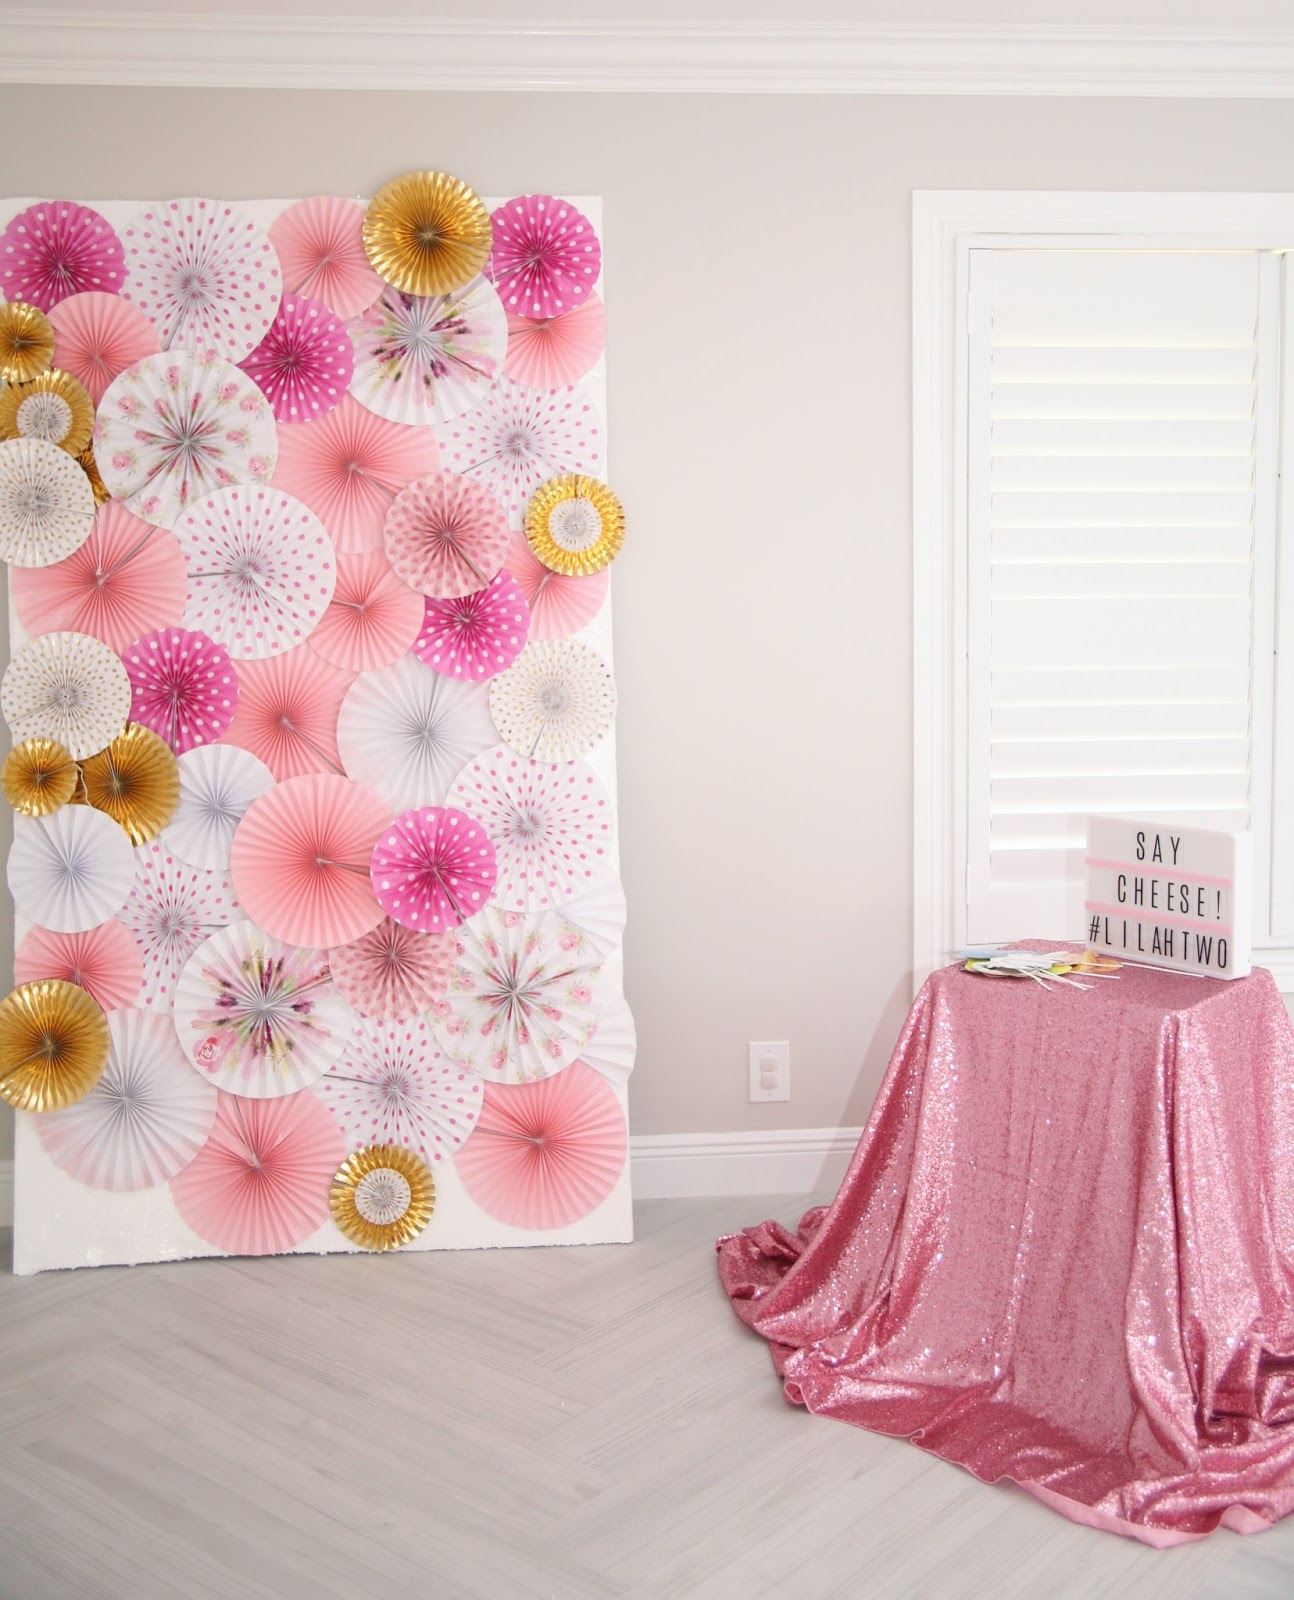 diy-how-to-make-a-photo-booth-backdrop-celebration-stylist